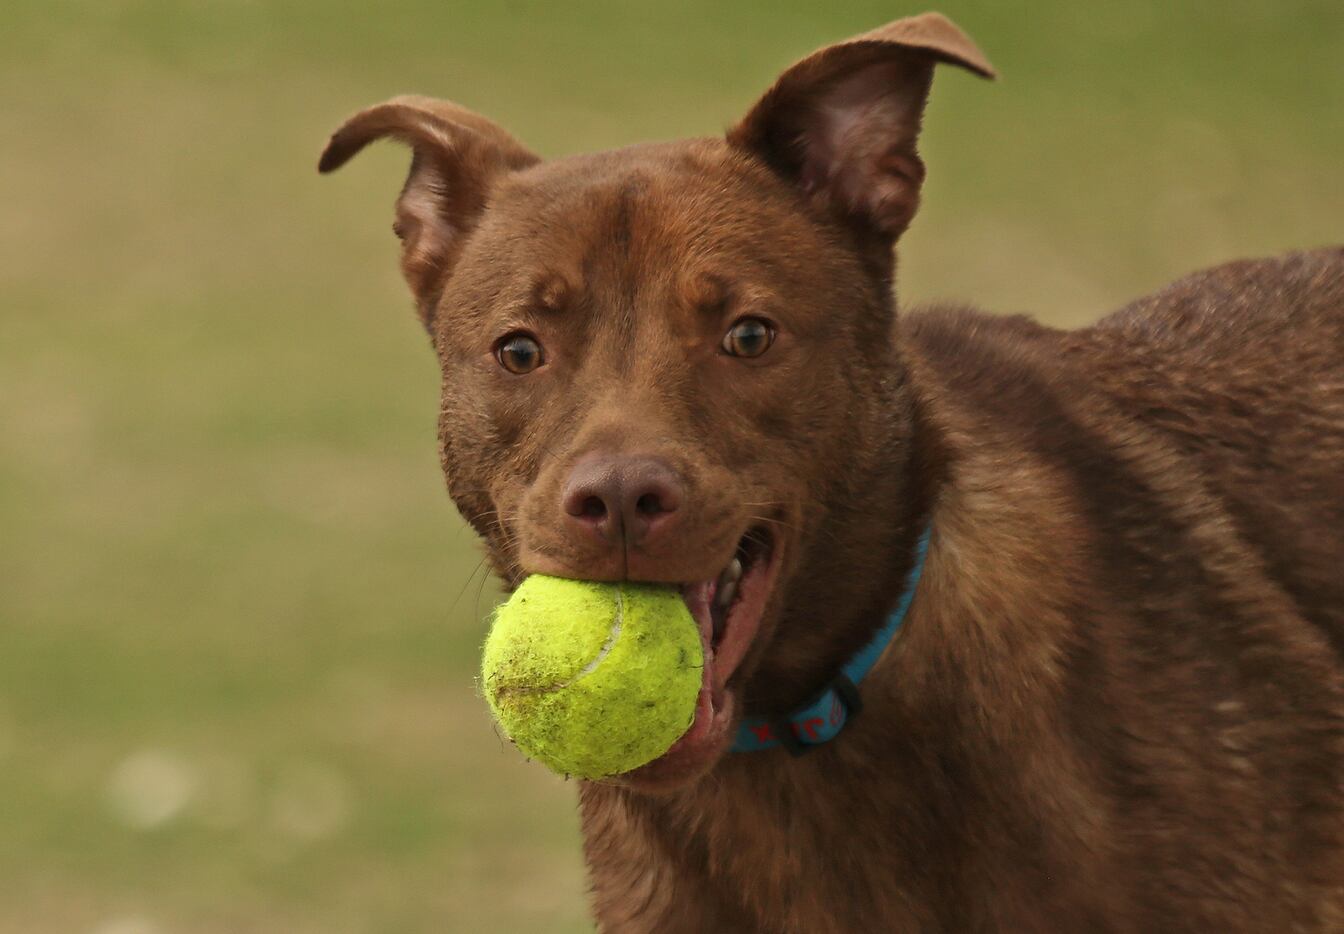 "Jax" enjoys a game of catch with his owners at NorthBark Dog Park, located near the...